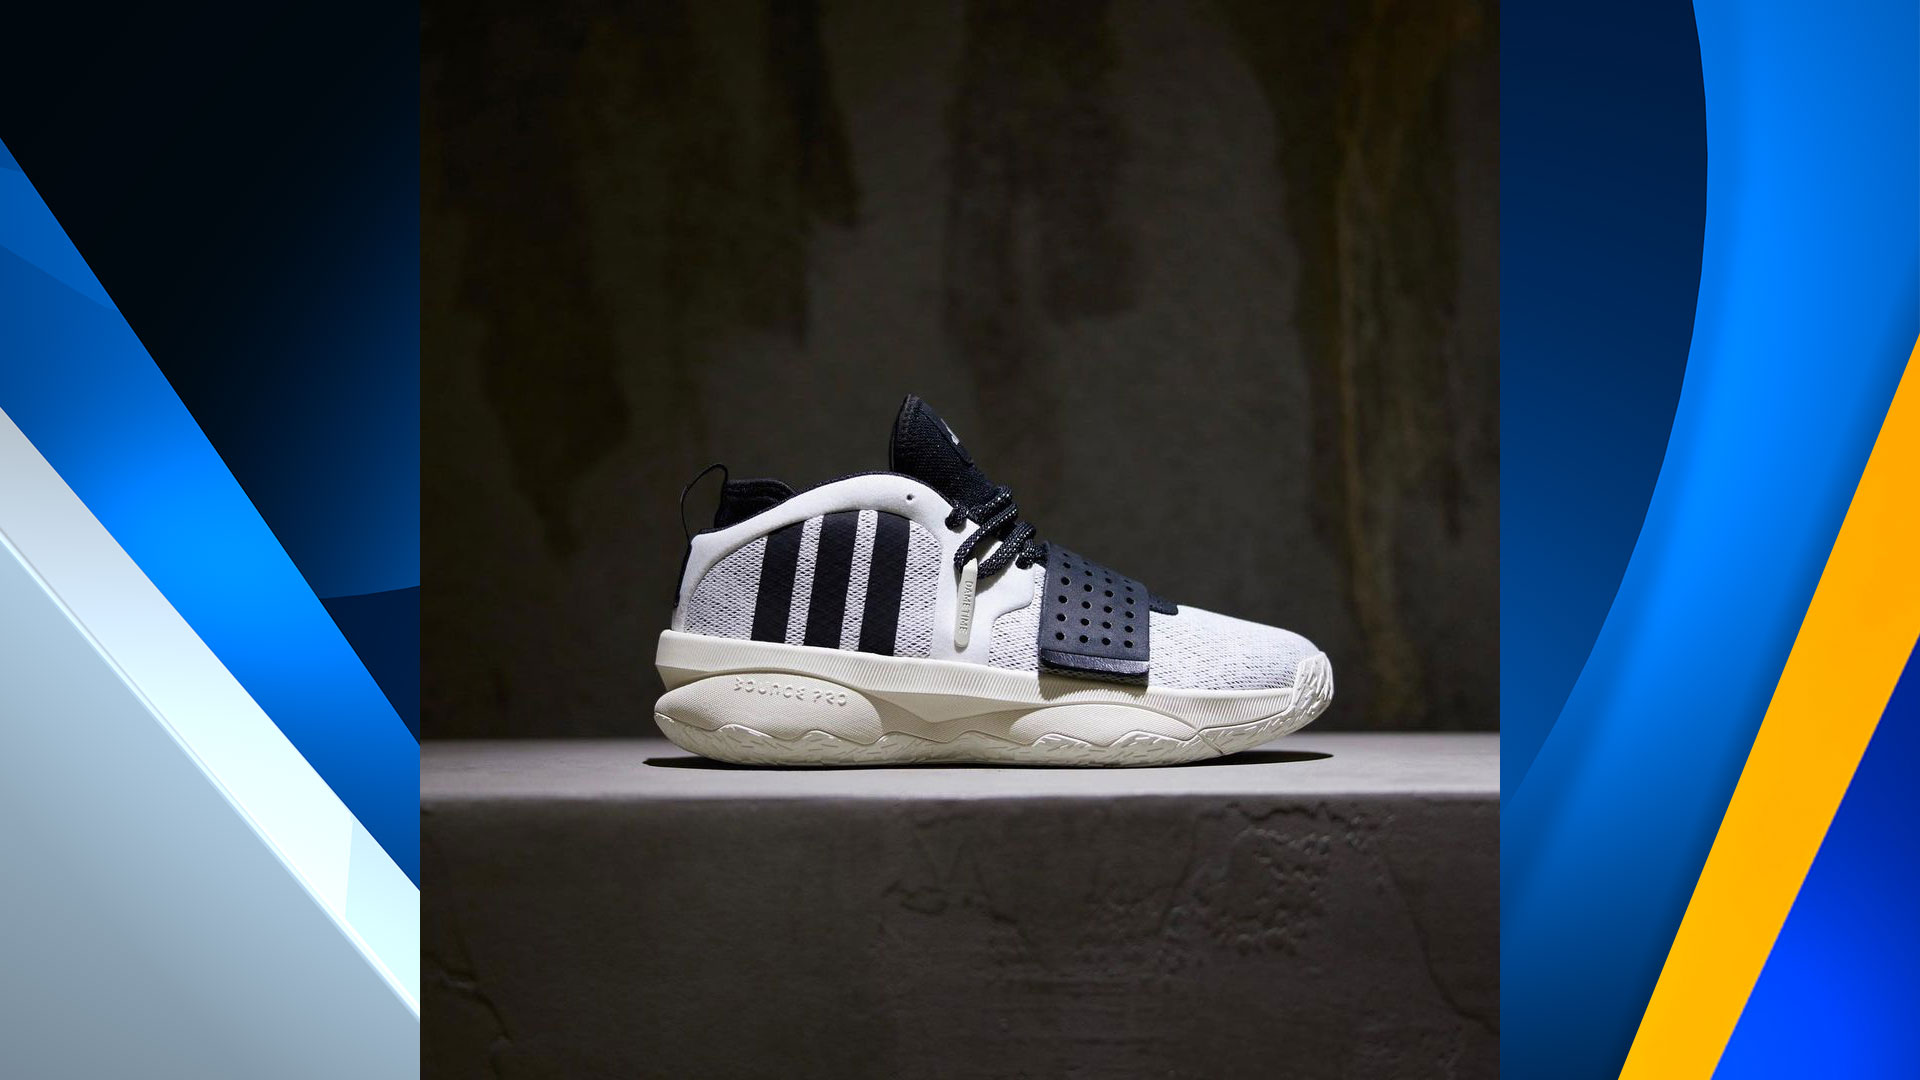 Sneakers Release – Adidas Dame 6 “Stone Cold” Royal/Black